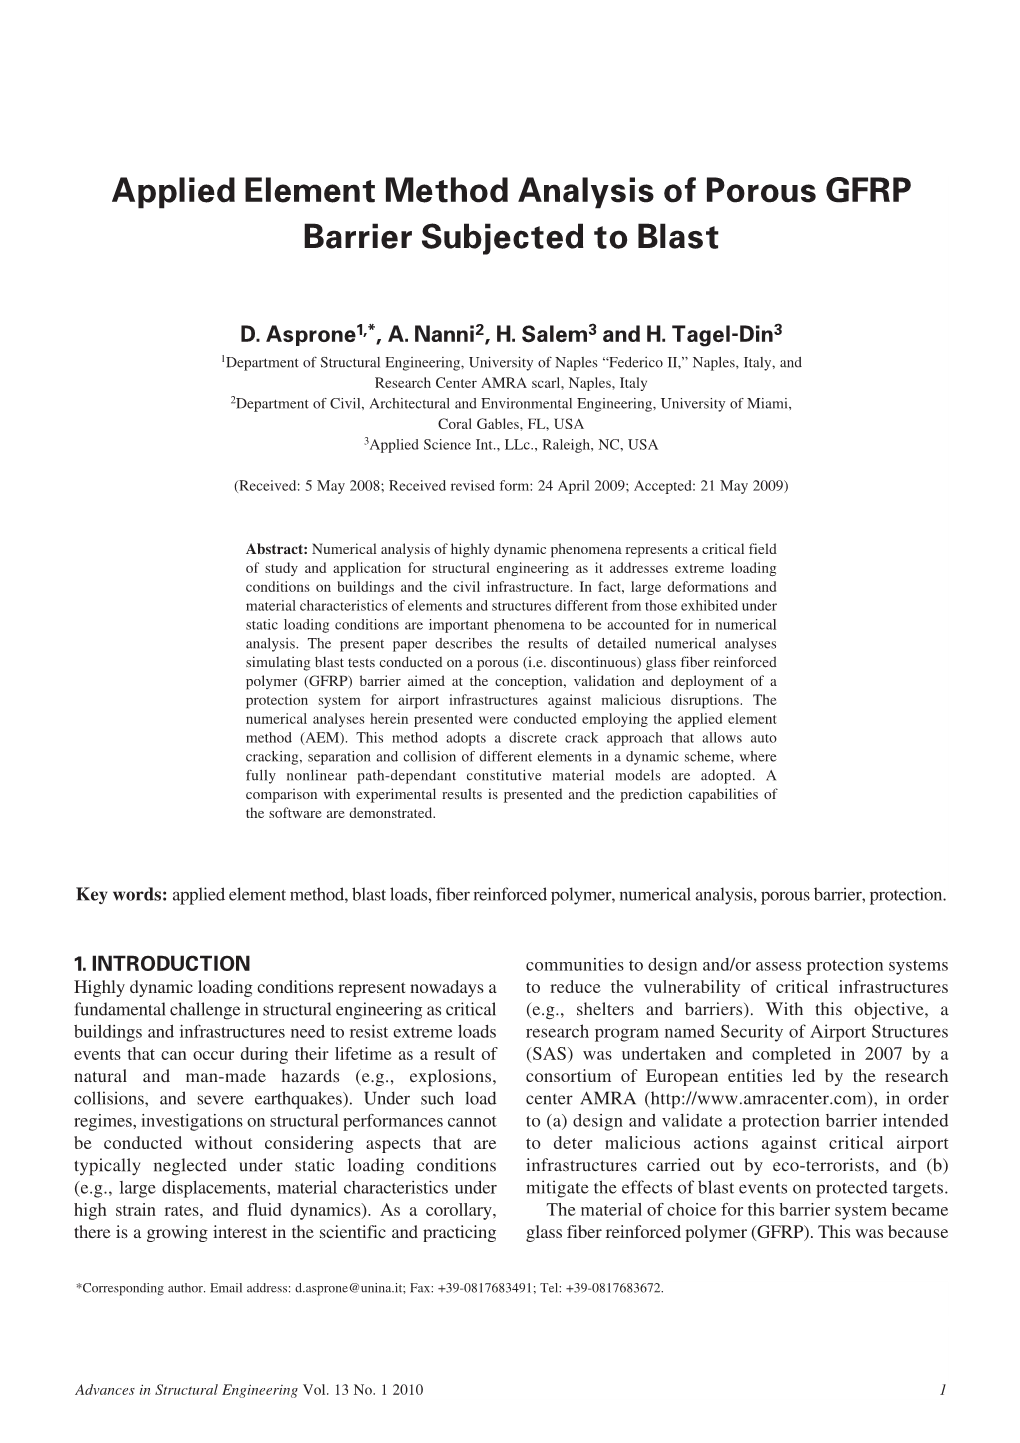 Applied Element Method Analysis of Porous GFRP Barrier Subjected to Blast